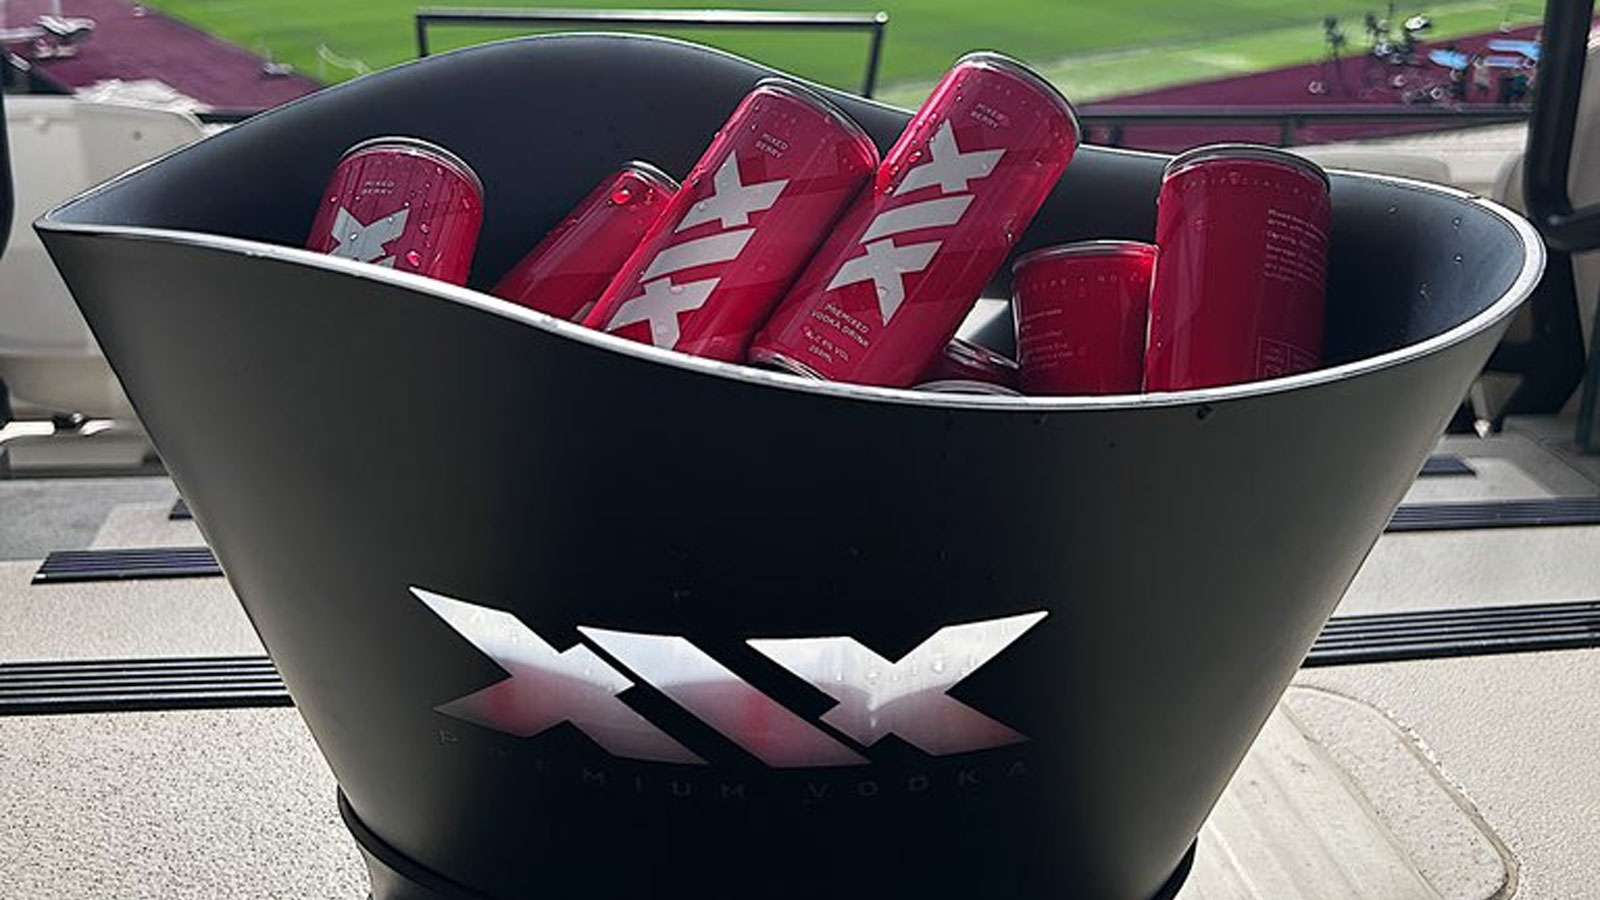 new XIX ready-to-drink vodka cans